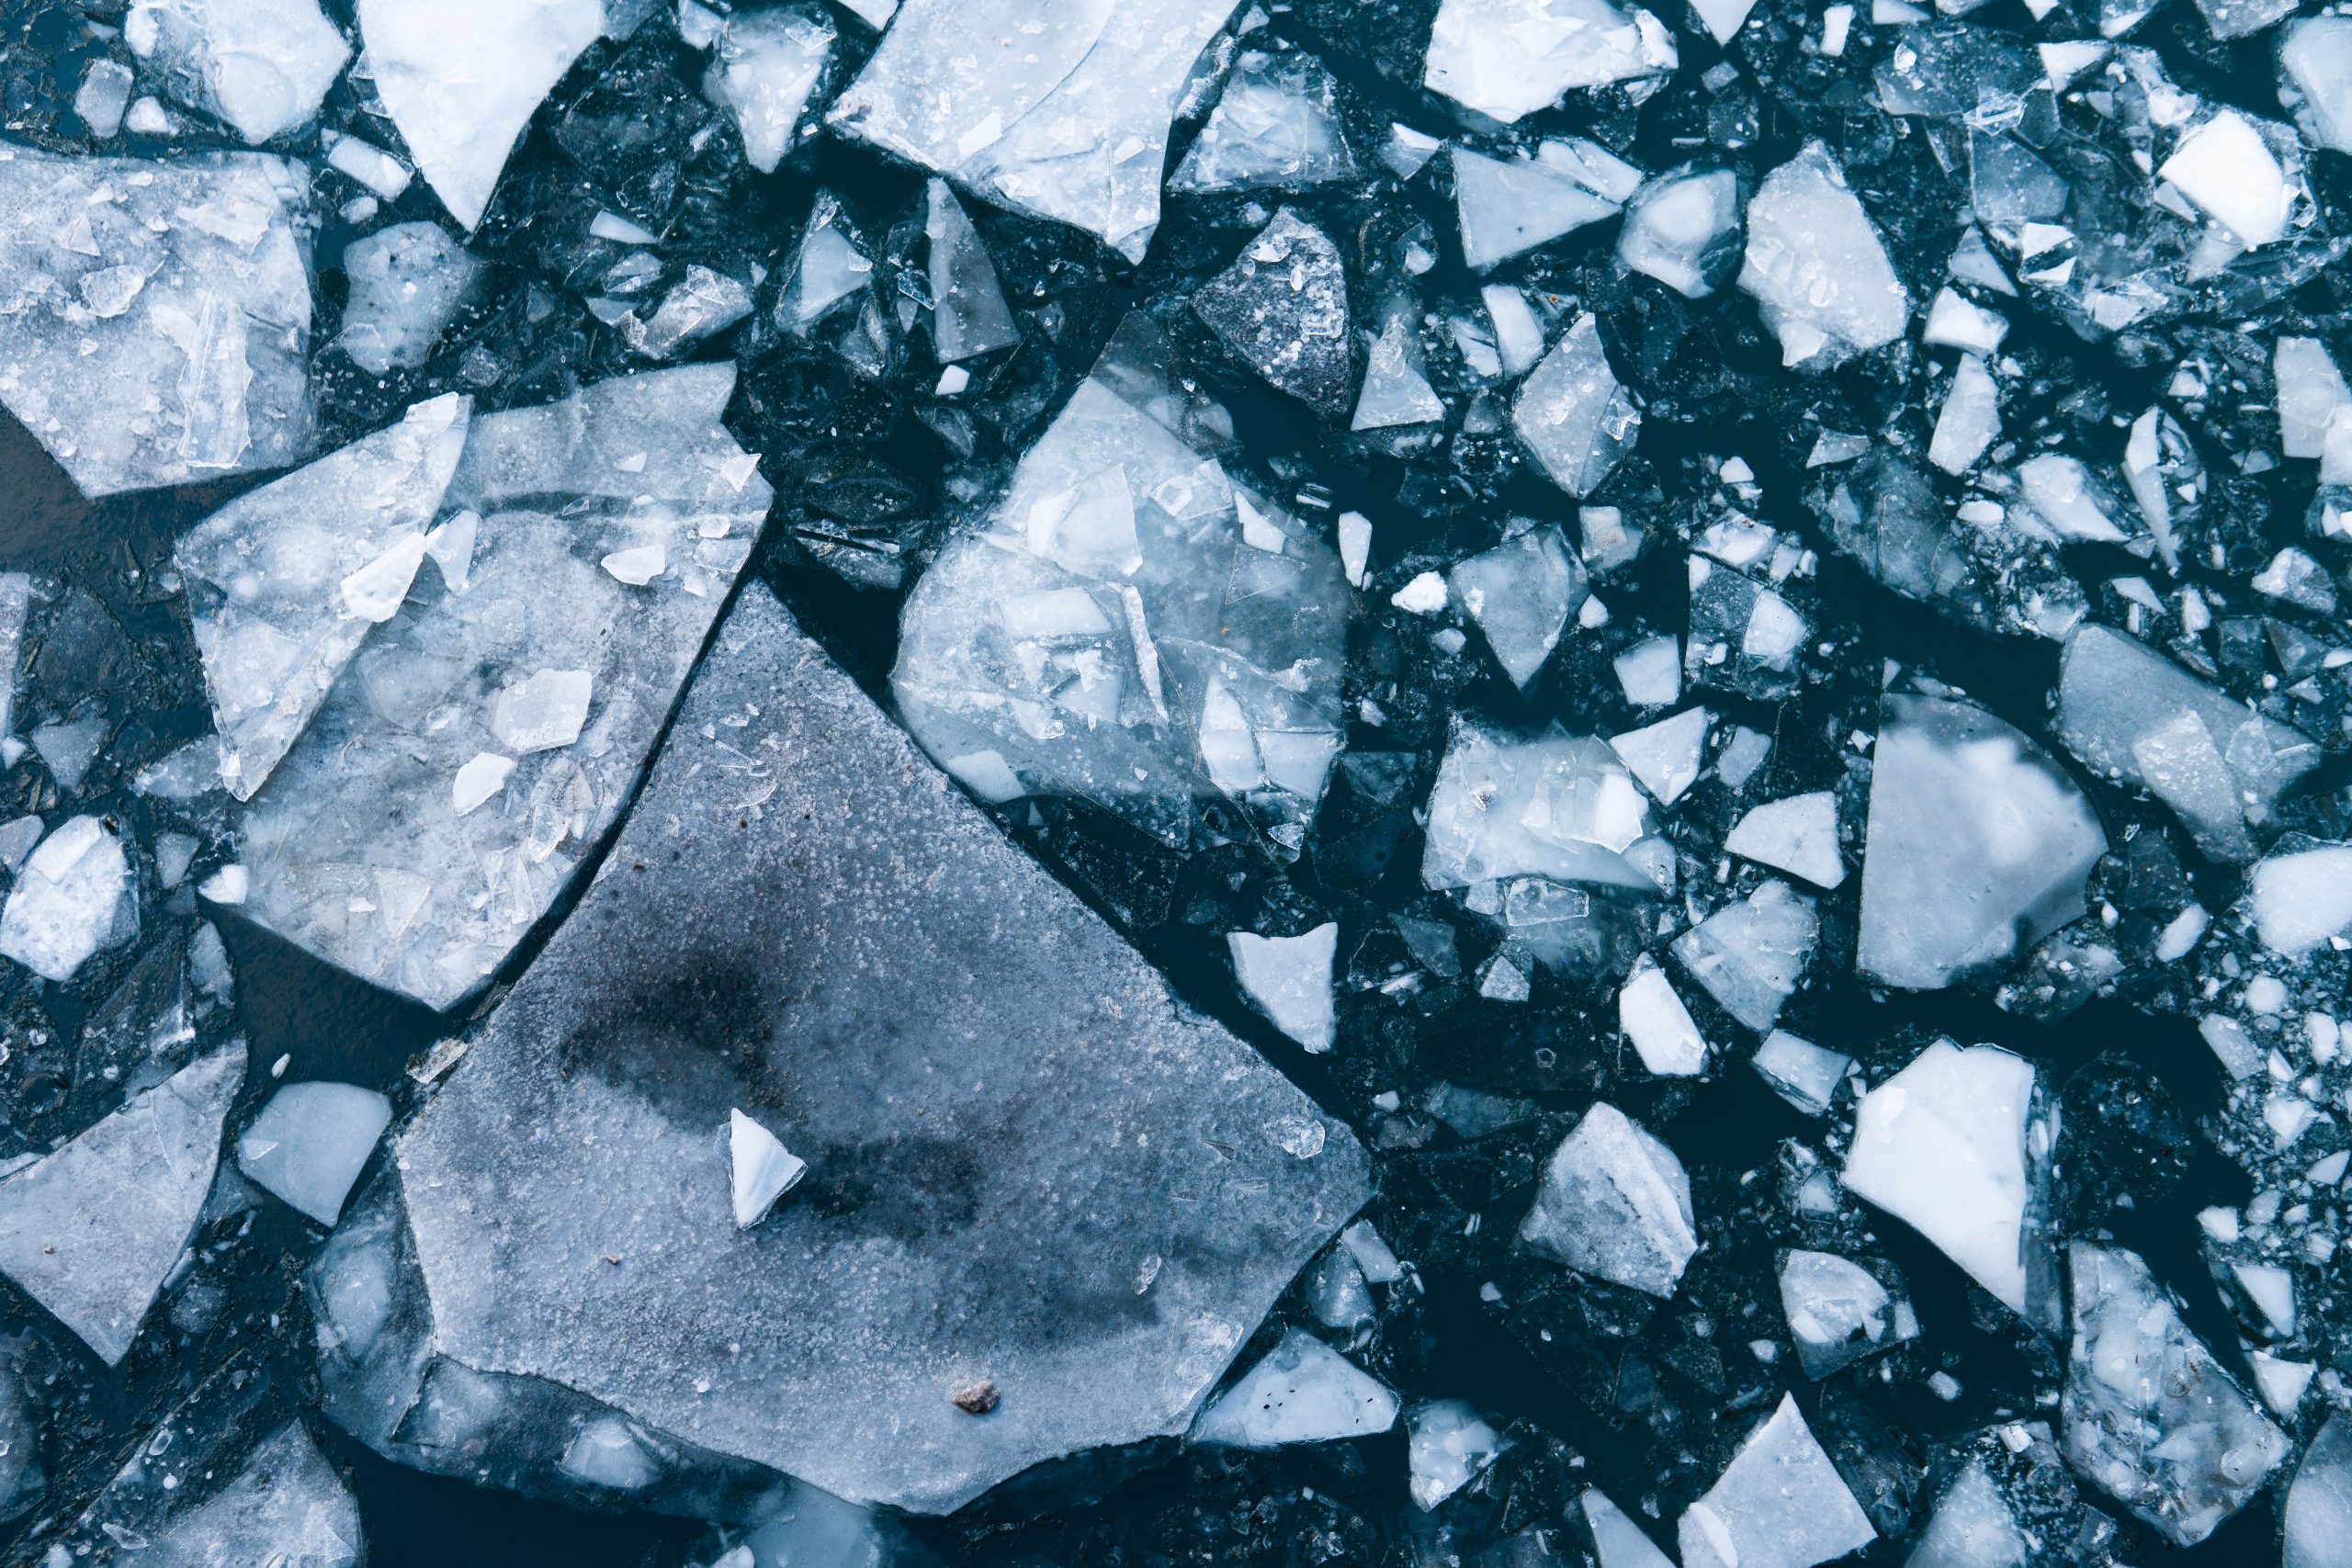 The broken shards of ice in dark water is a metaphor for keeping our well being intact during the coming holiday